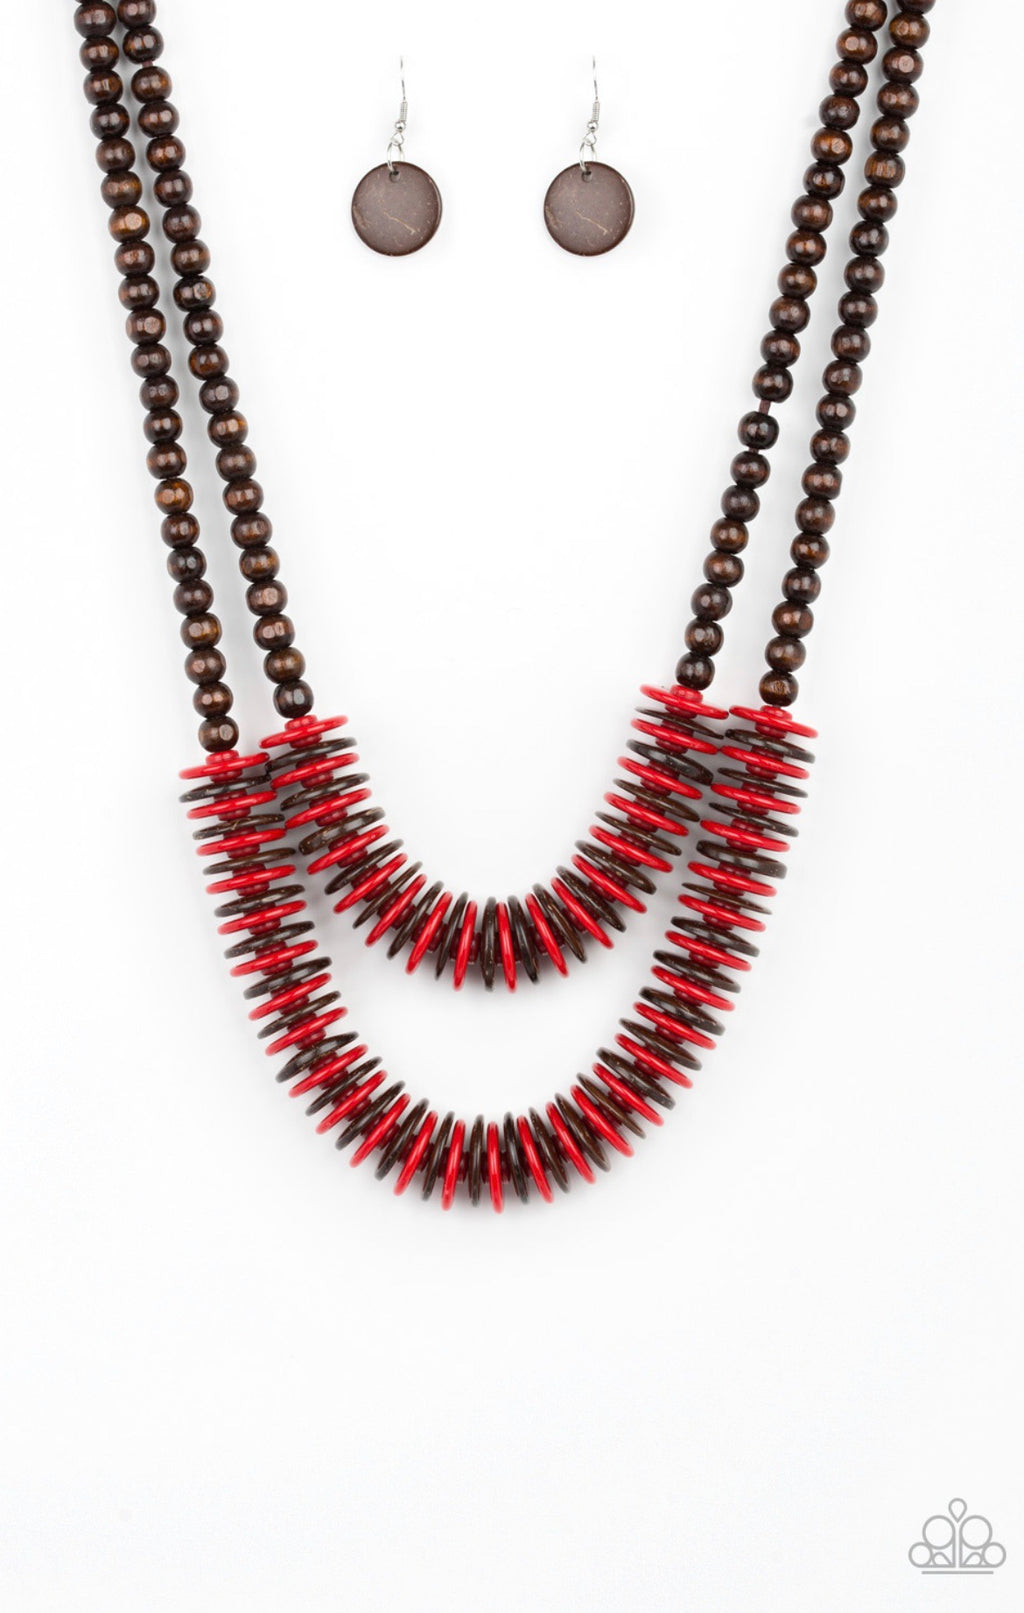 Dominican Disco Red Necklace